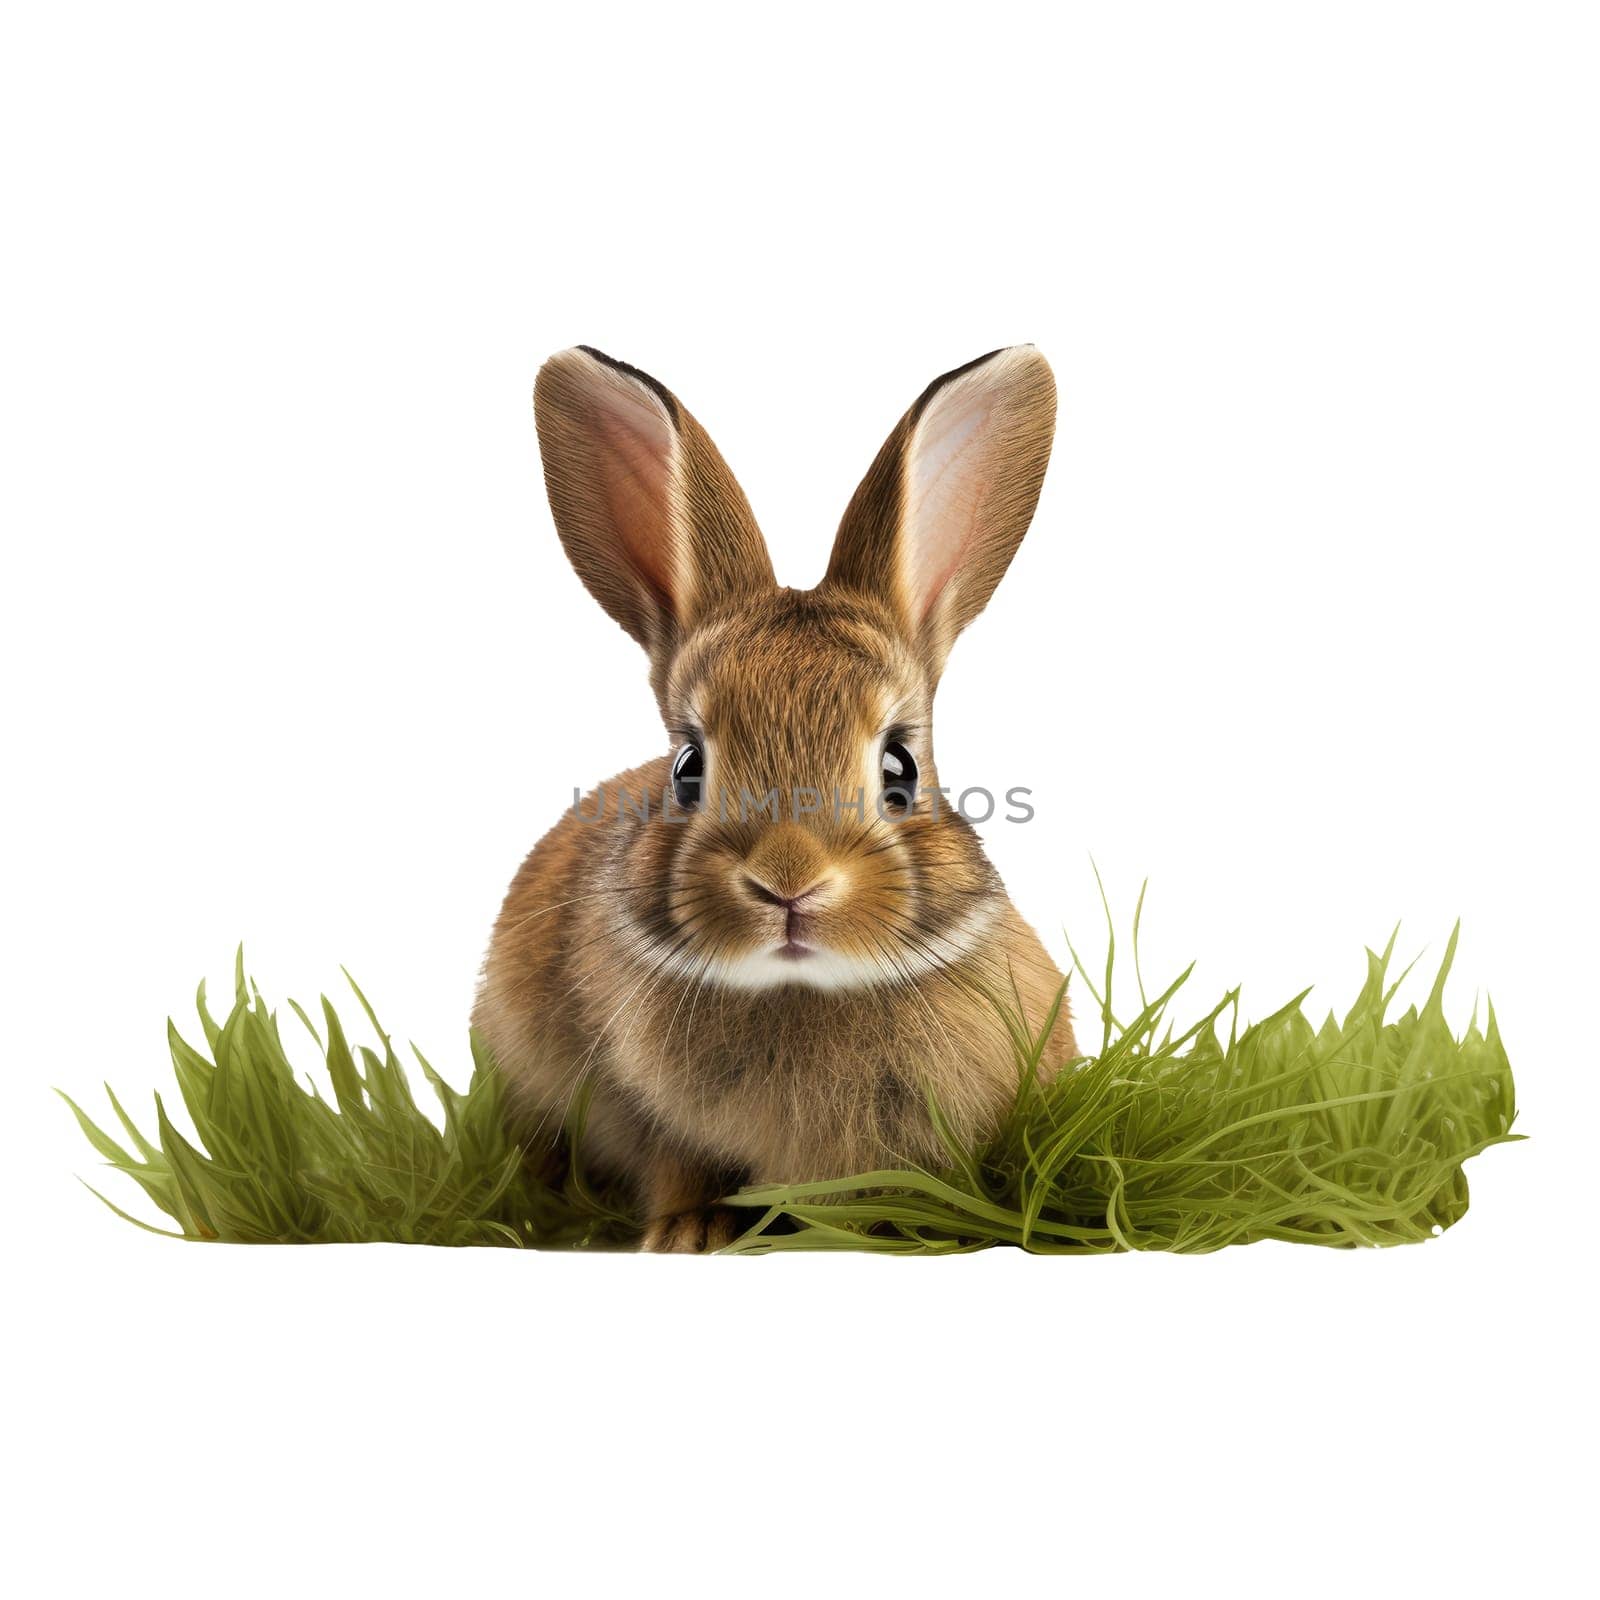 Bunny rabbit in the grass on a white background by natali_brill